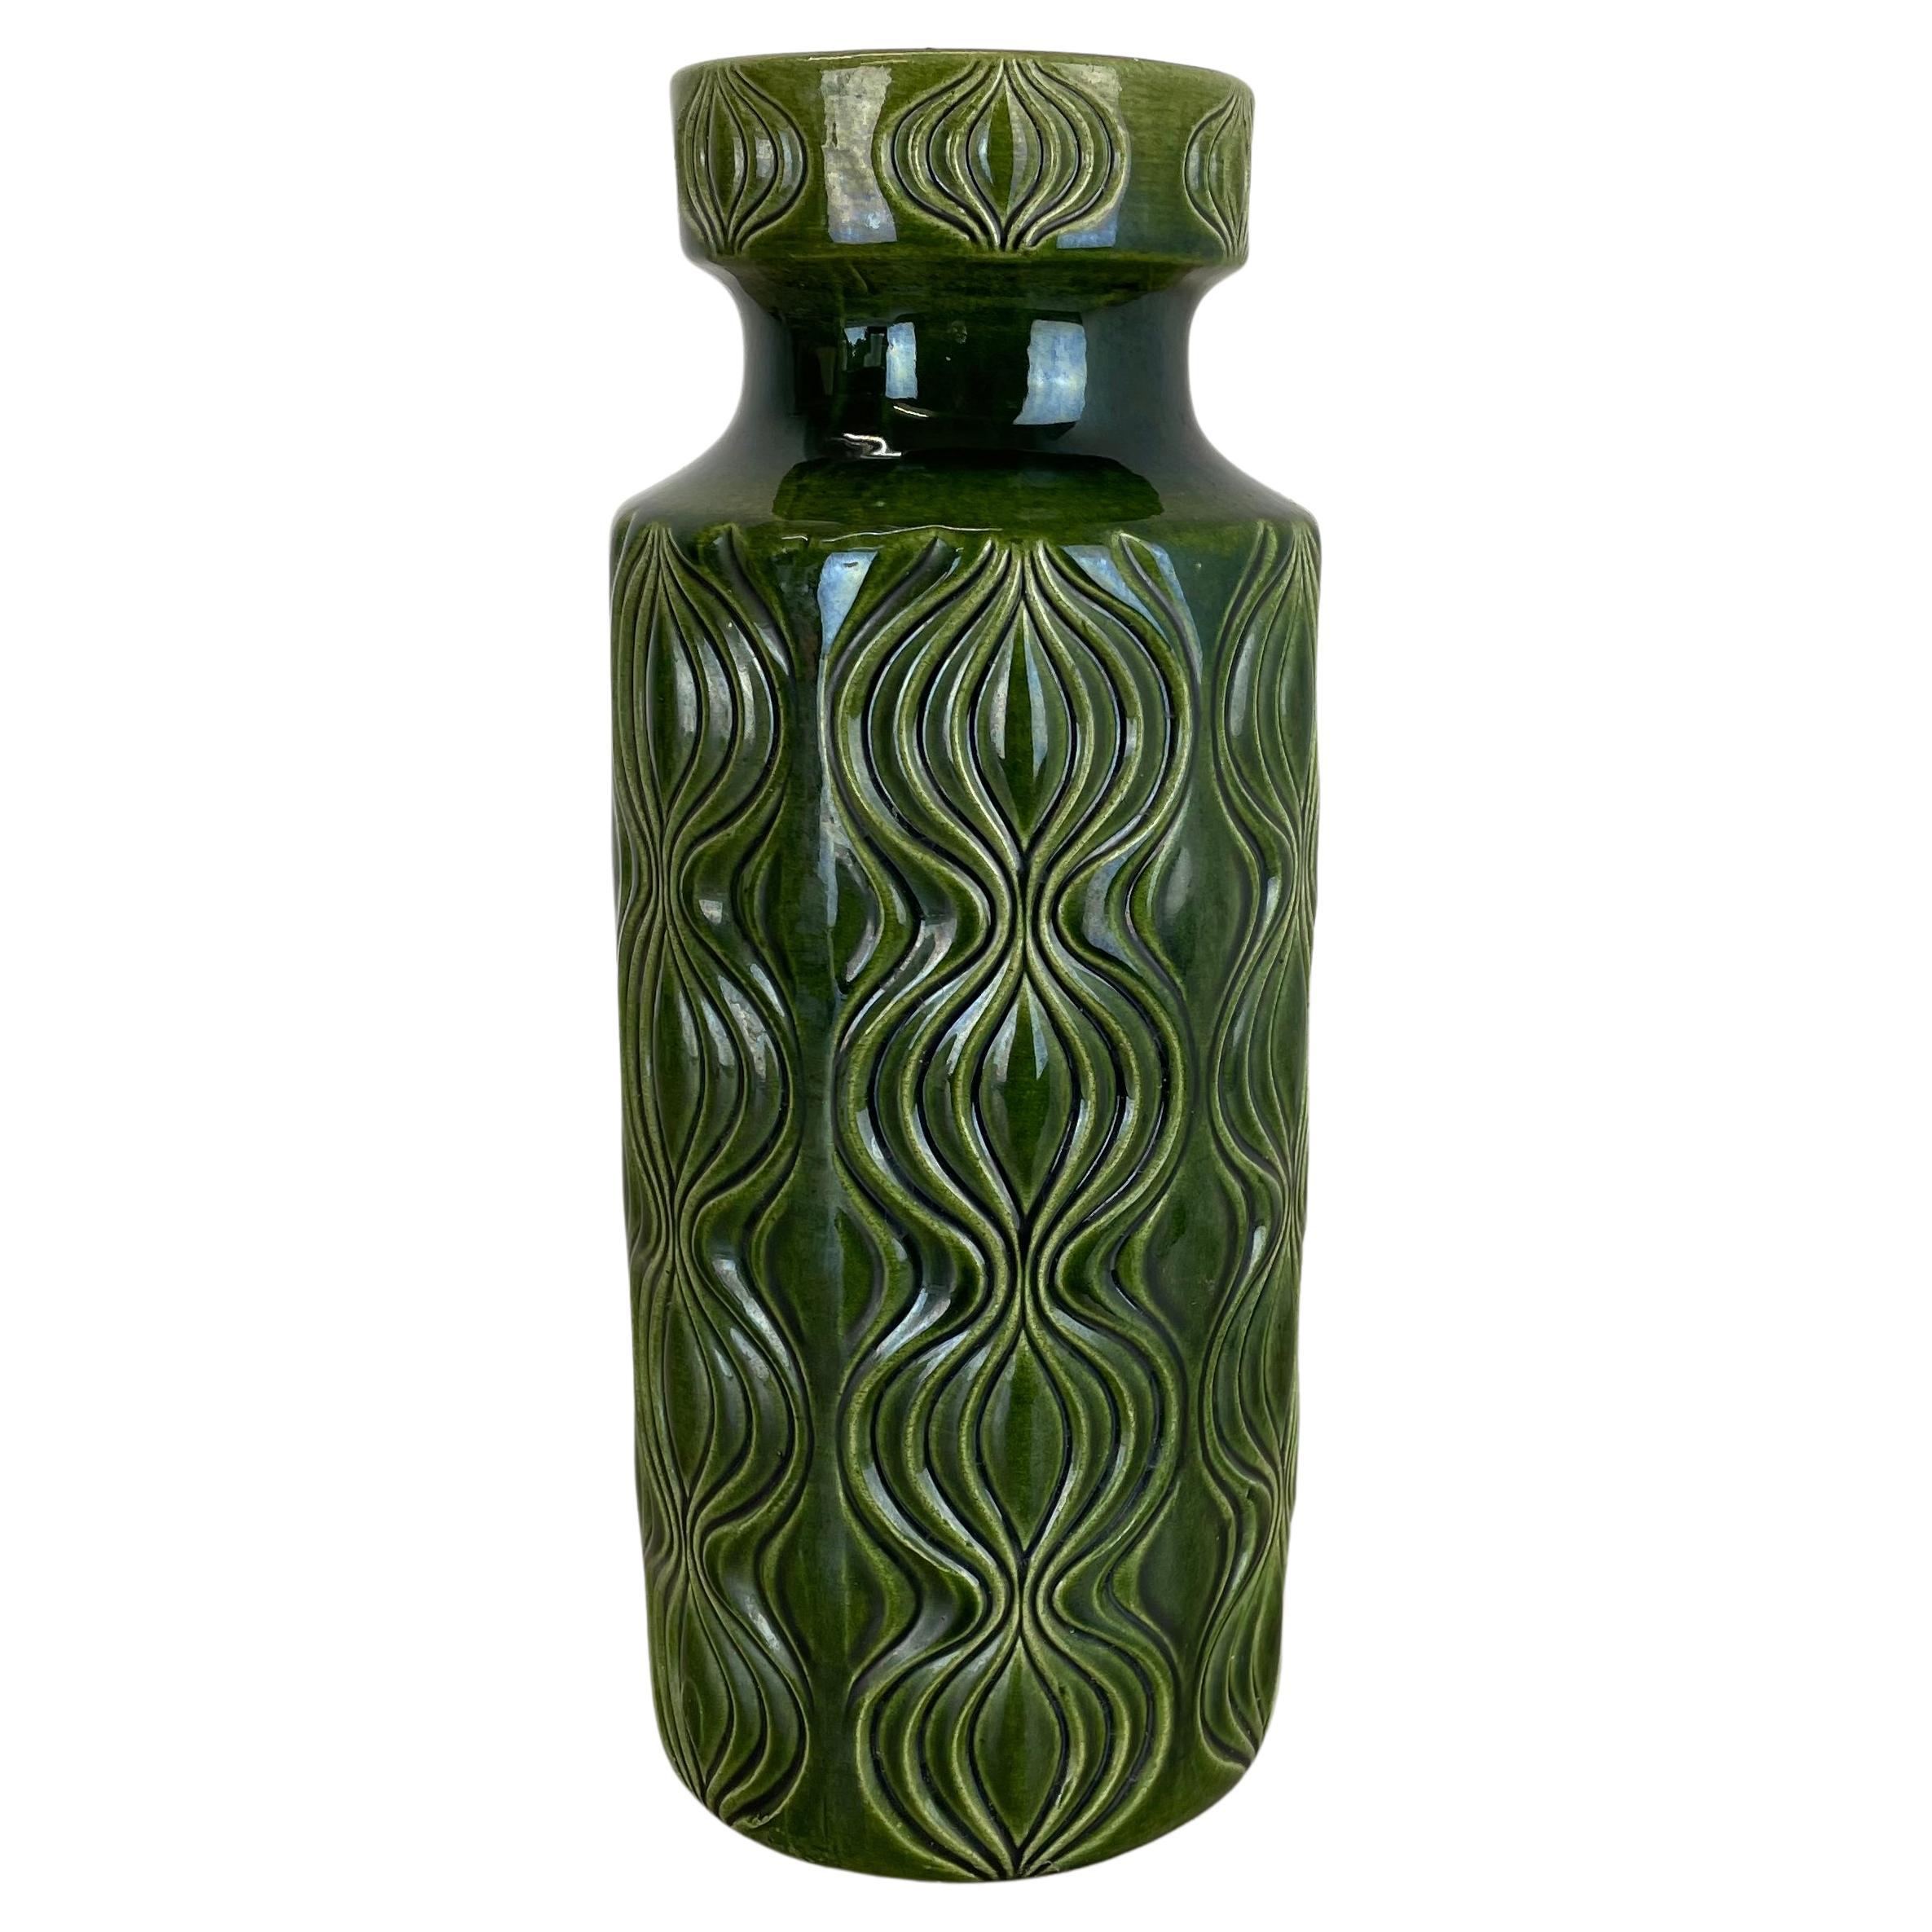 Rare Green Floor Vase Fat Lava "Onion" Vase by Scheurich, Germany, 1970s For Sale